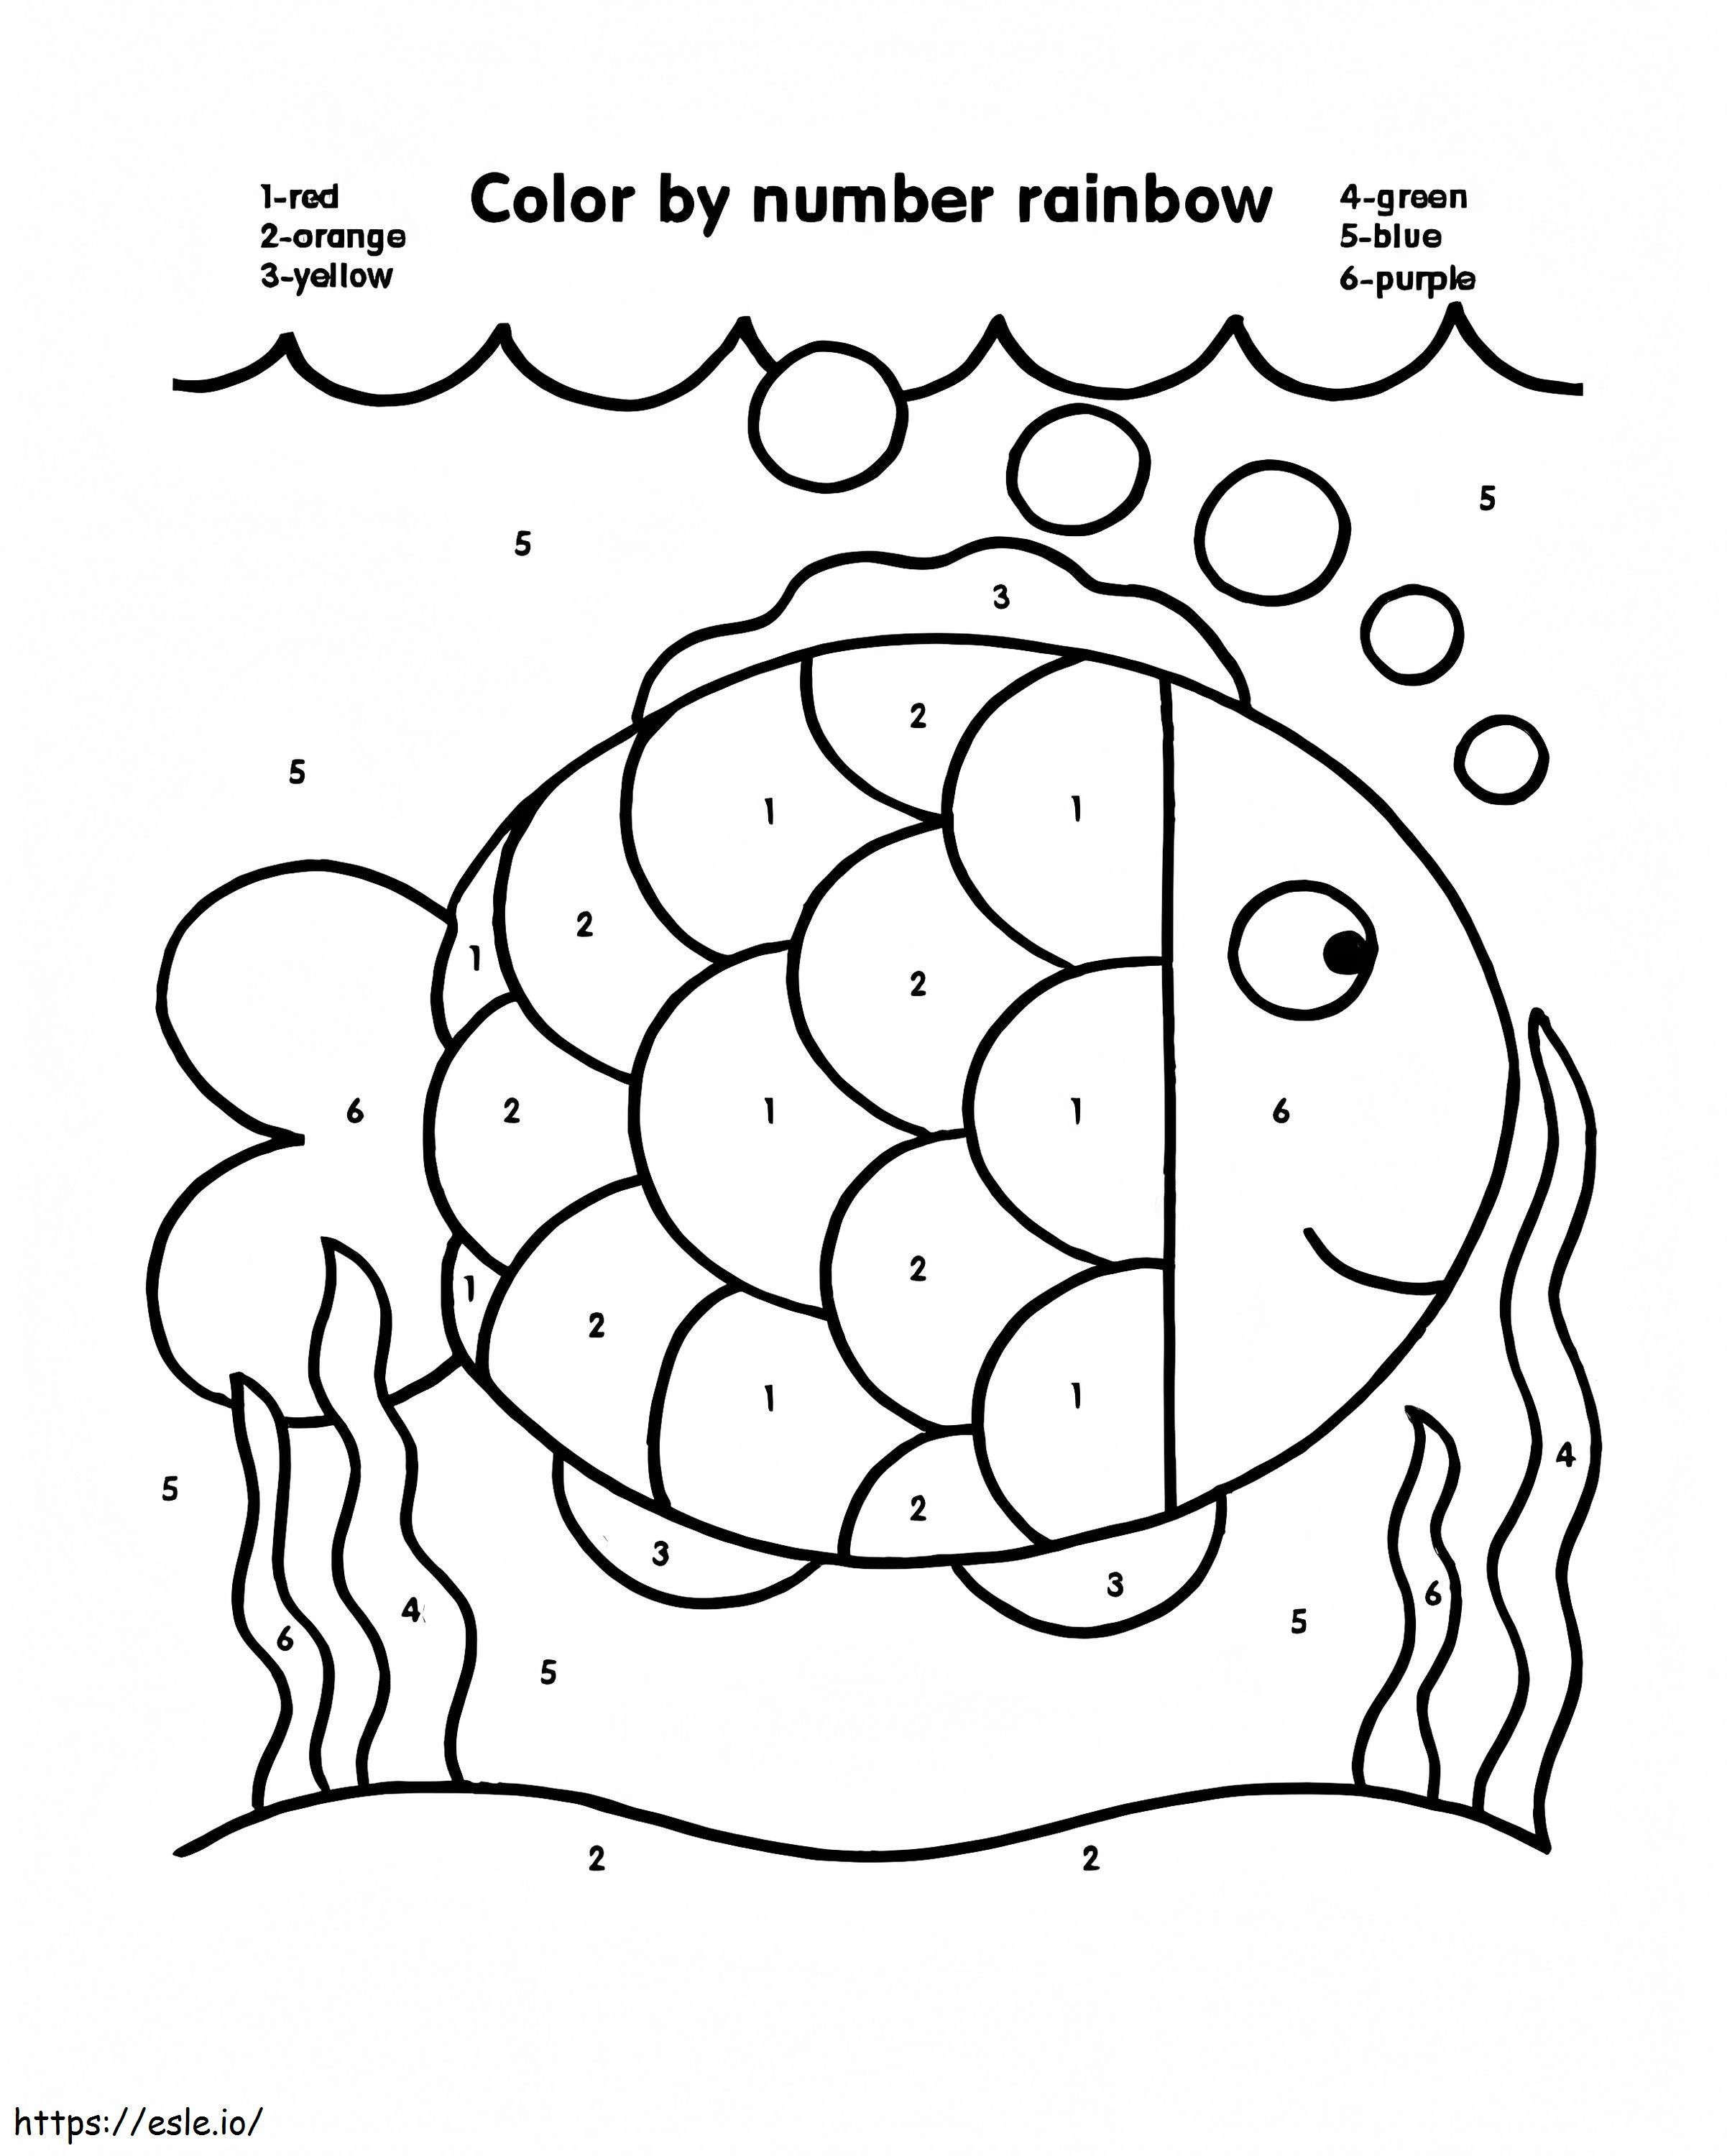 Basic Rainbow Fish Color By Numbers coloring page